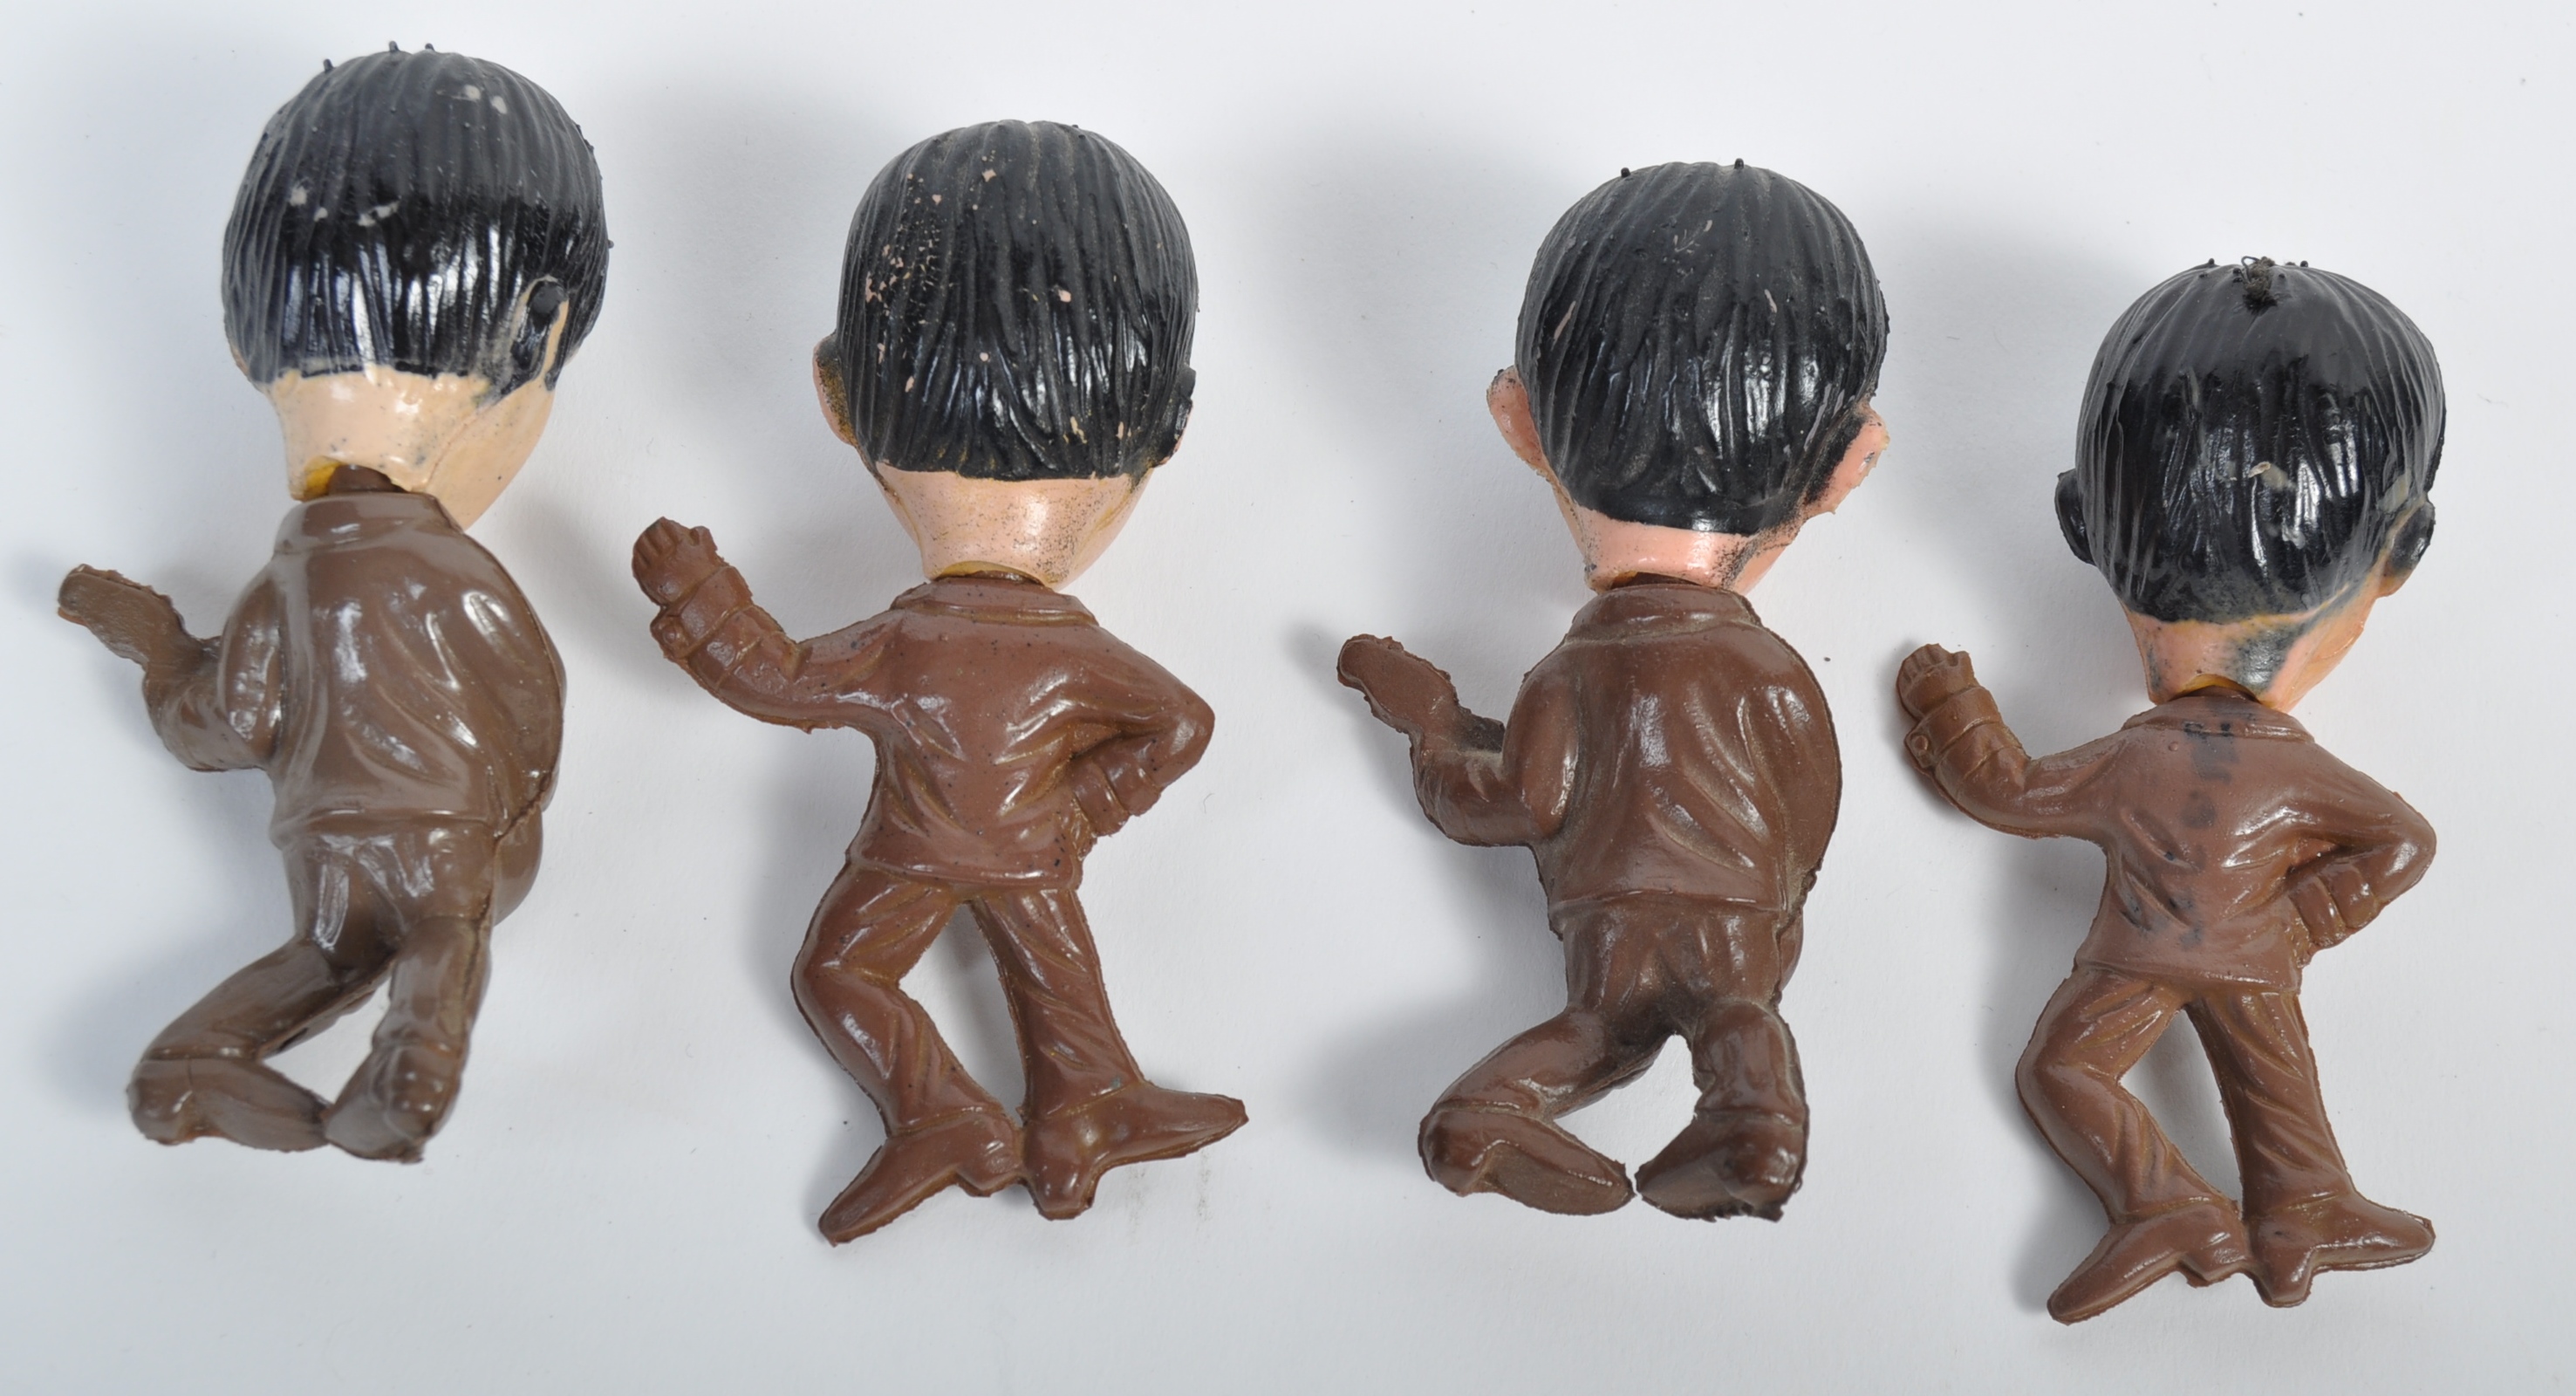 THE BEATLES - RARE SET OF VINTAGE RUBBER FIGURES - Image 4 of 4